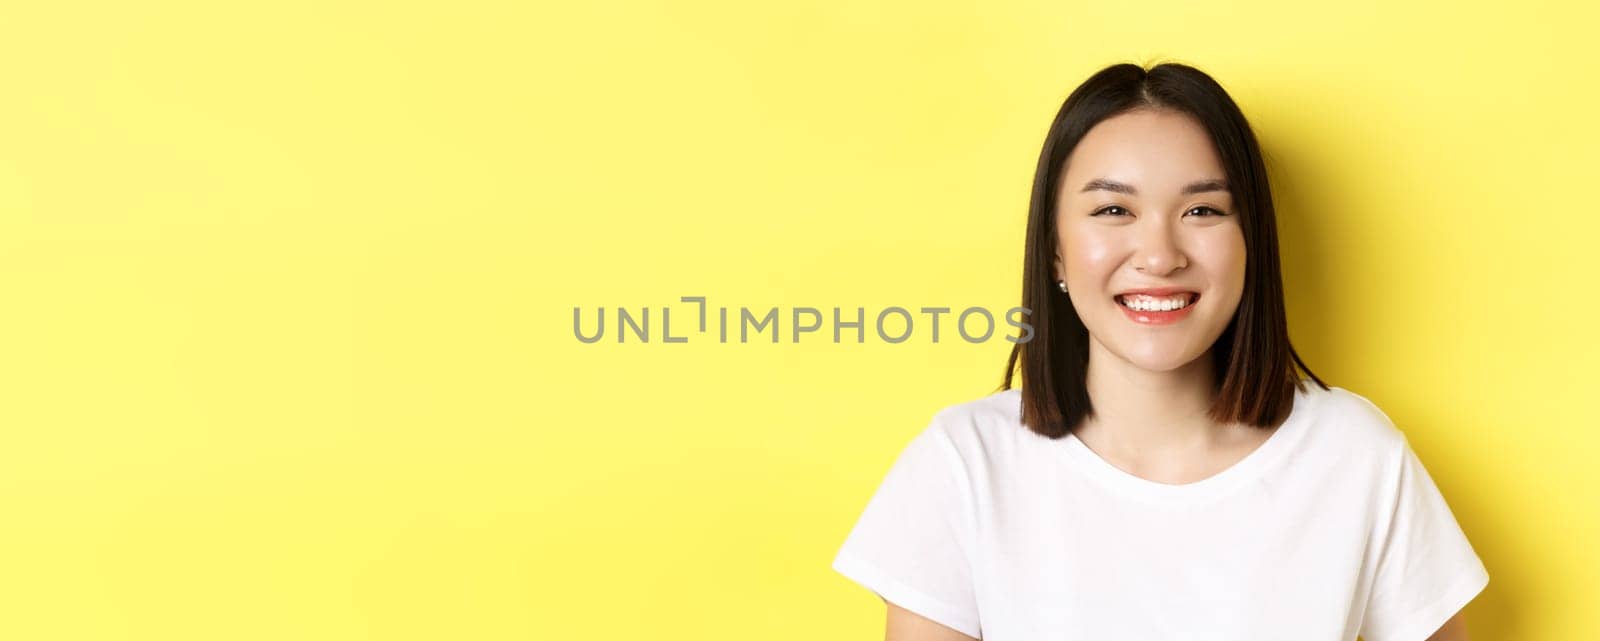 Beauty. Close up of smiling cute asian woman with perfect white smile teeth and glowing skin, standing over yellow background in t-shirt by Benzoix